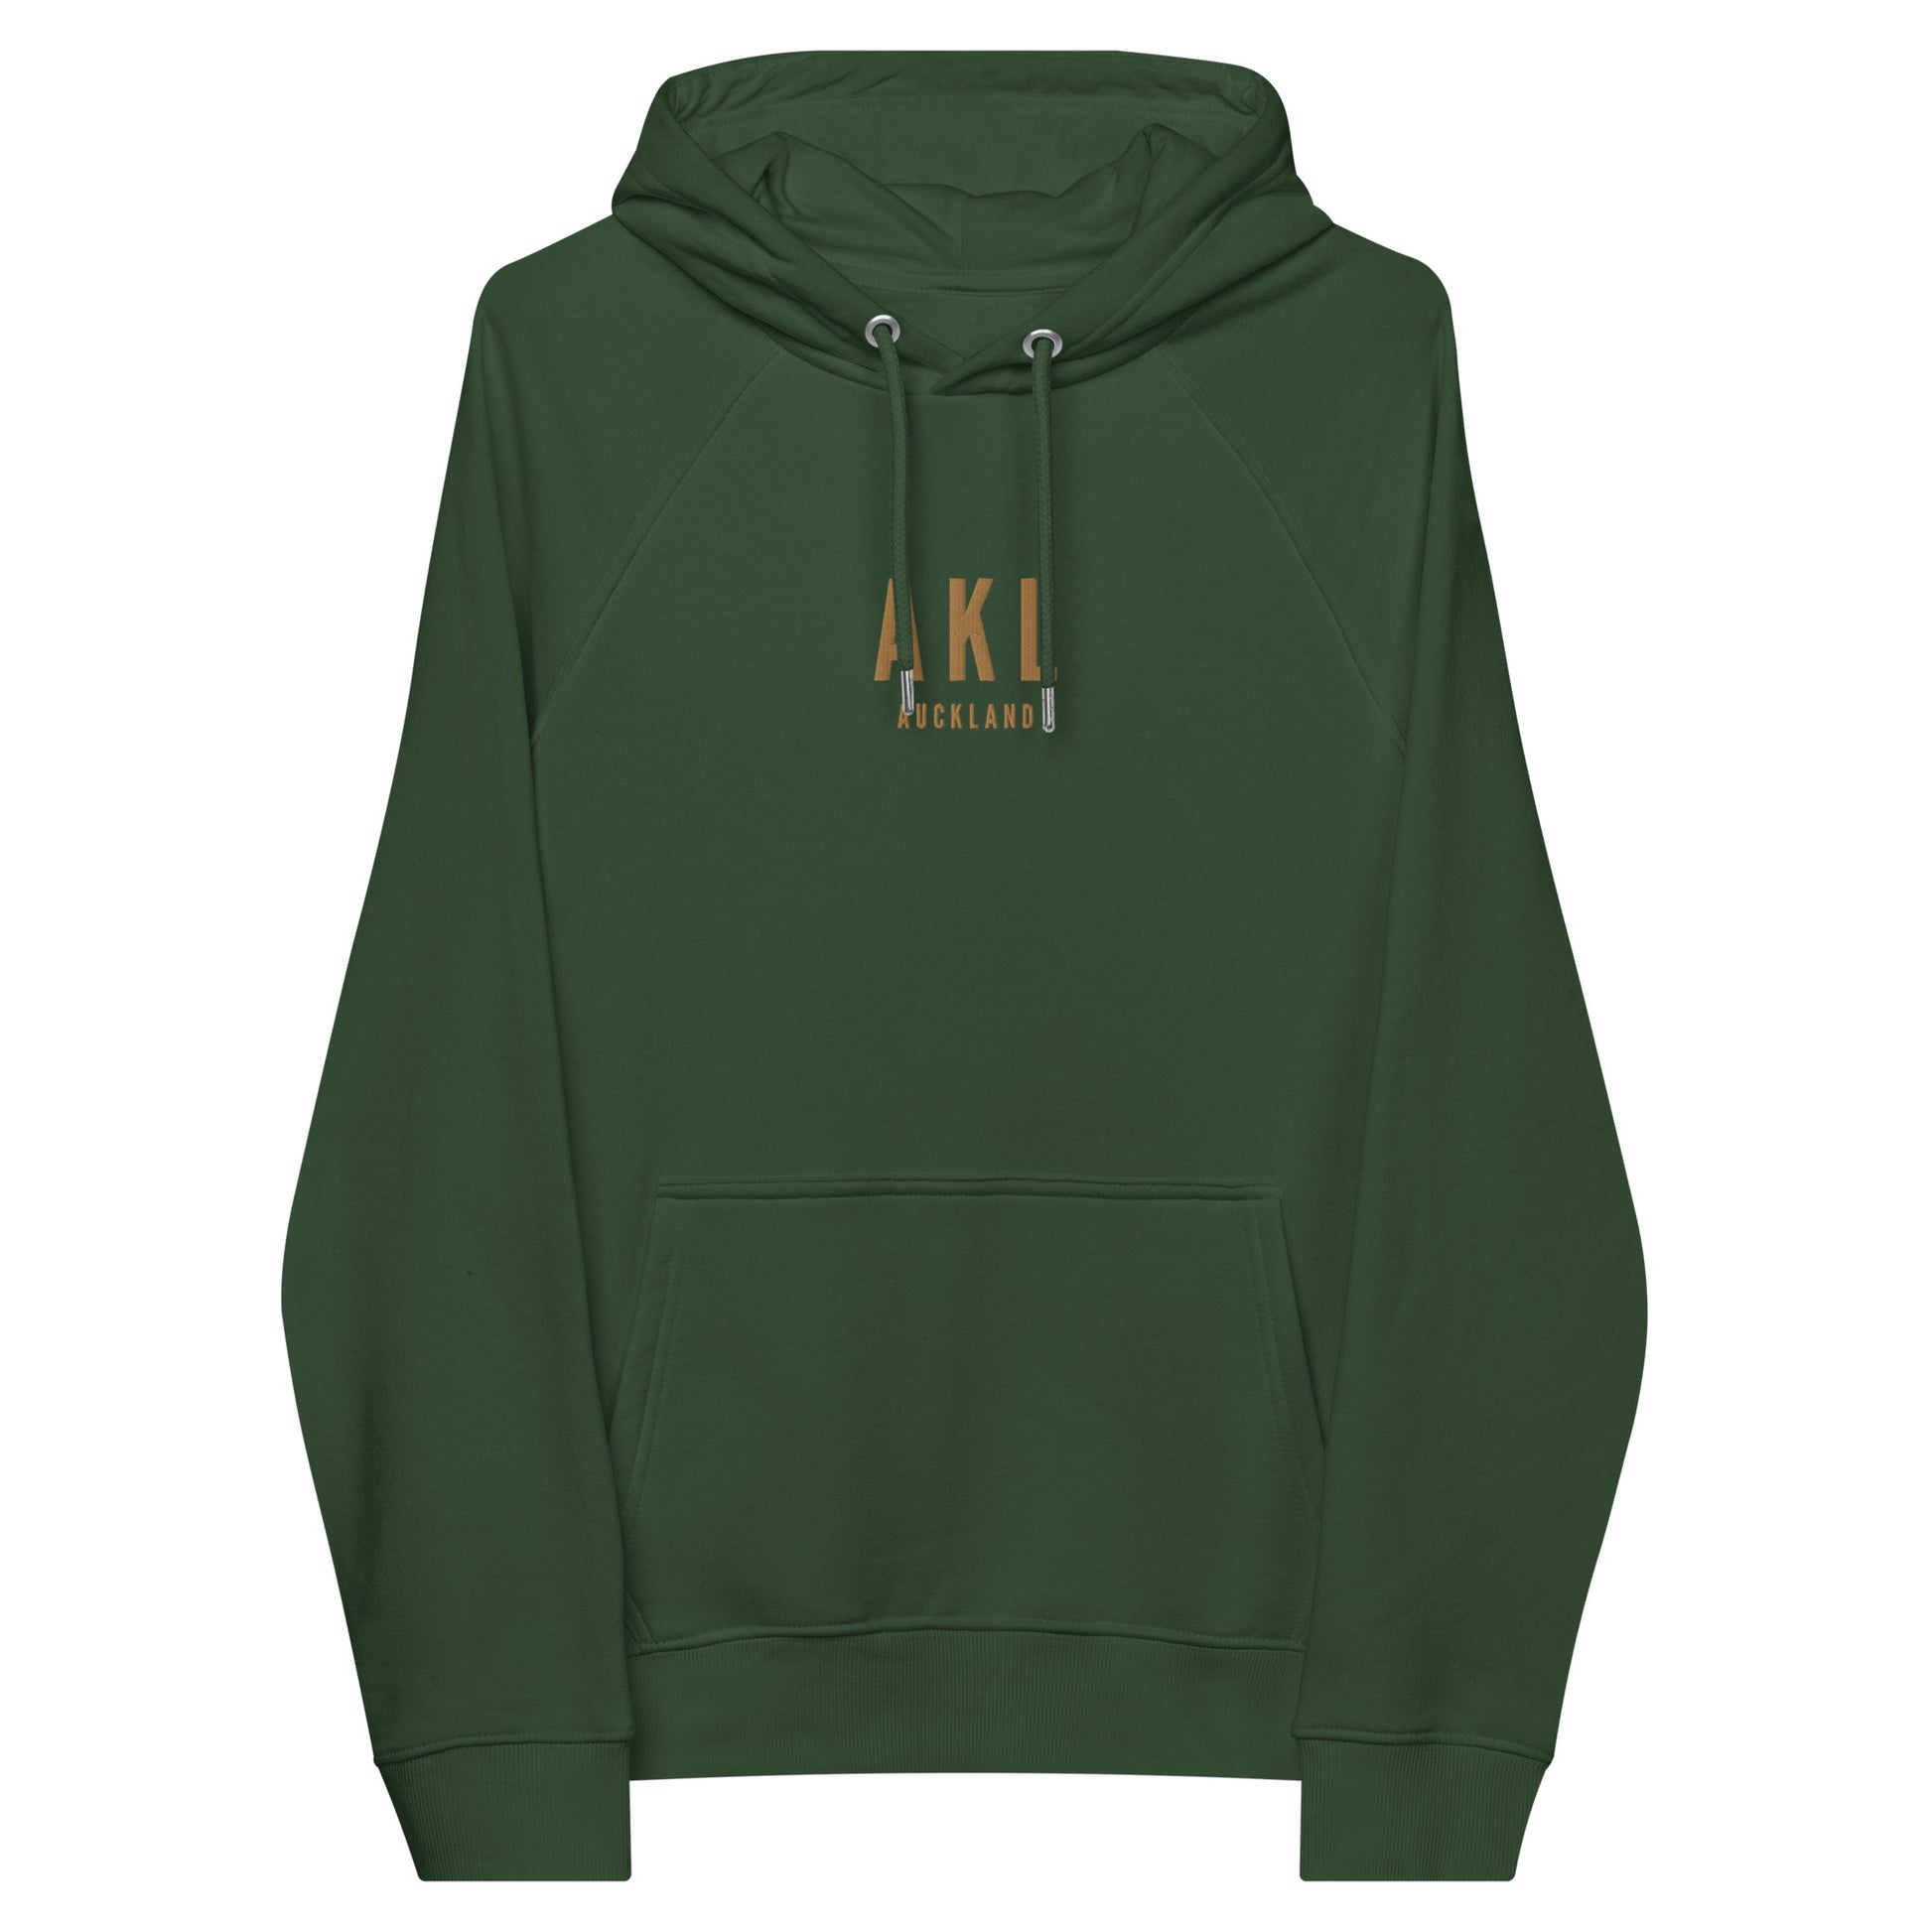 City Organic Hoodie - Old Gold • AKL Auckland • YHM Designs - Image 08